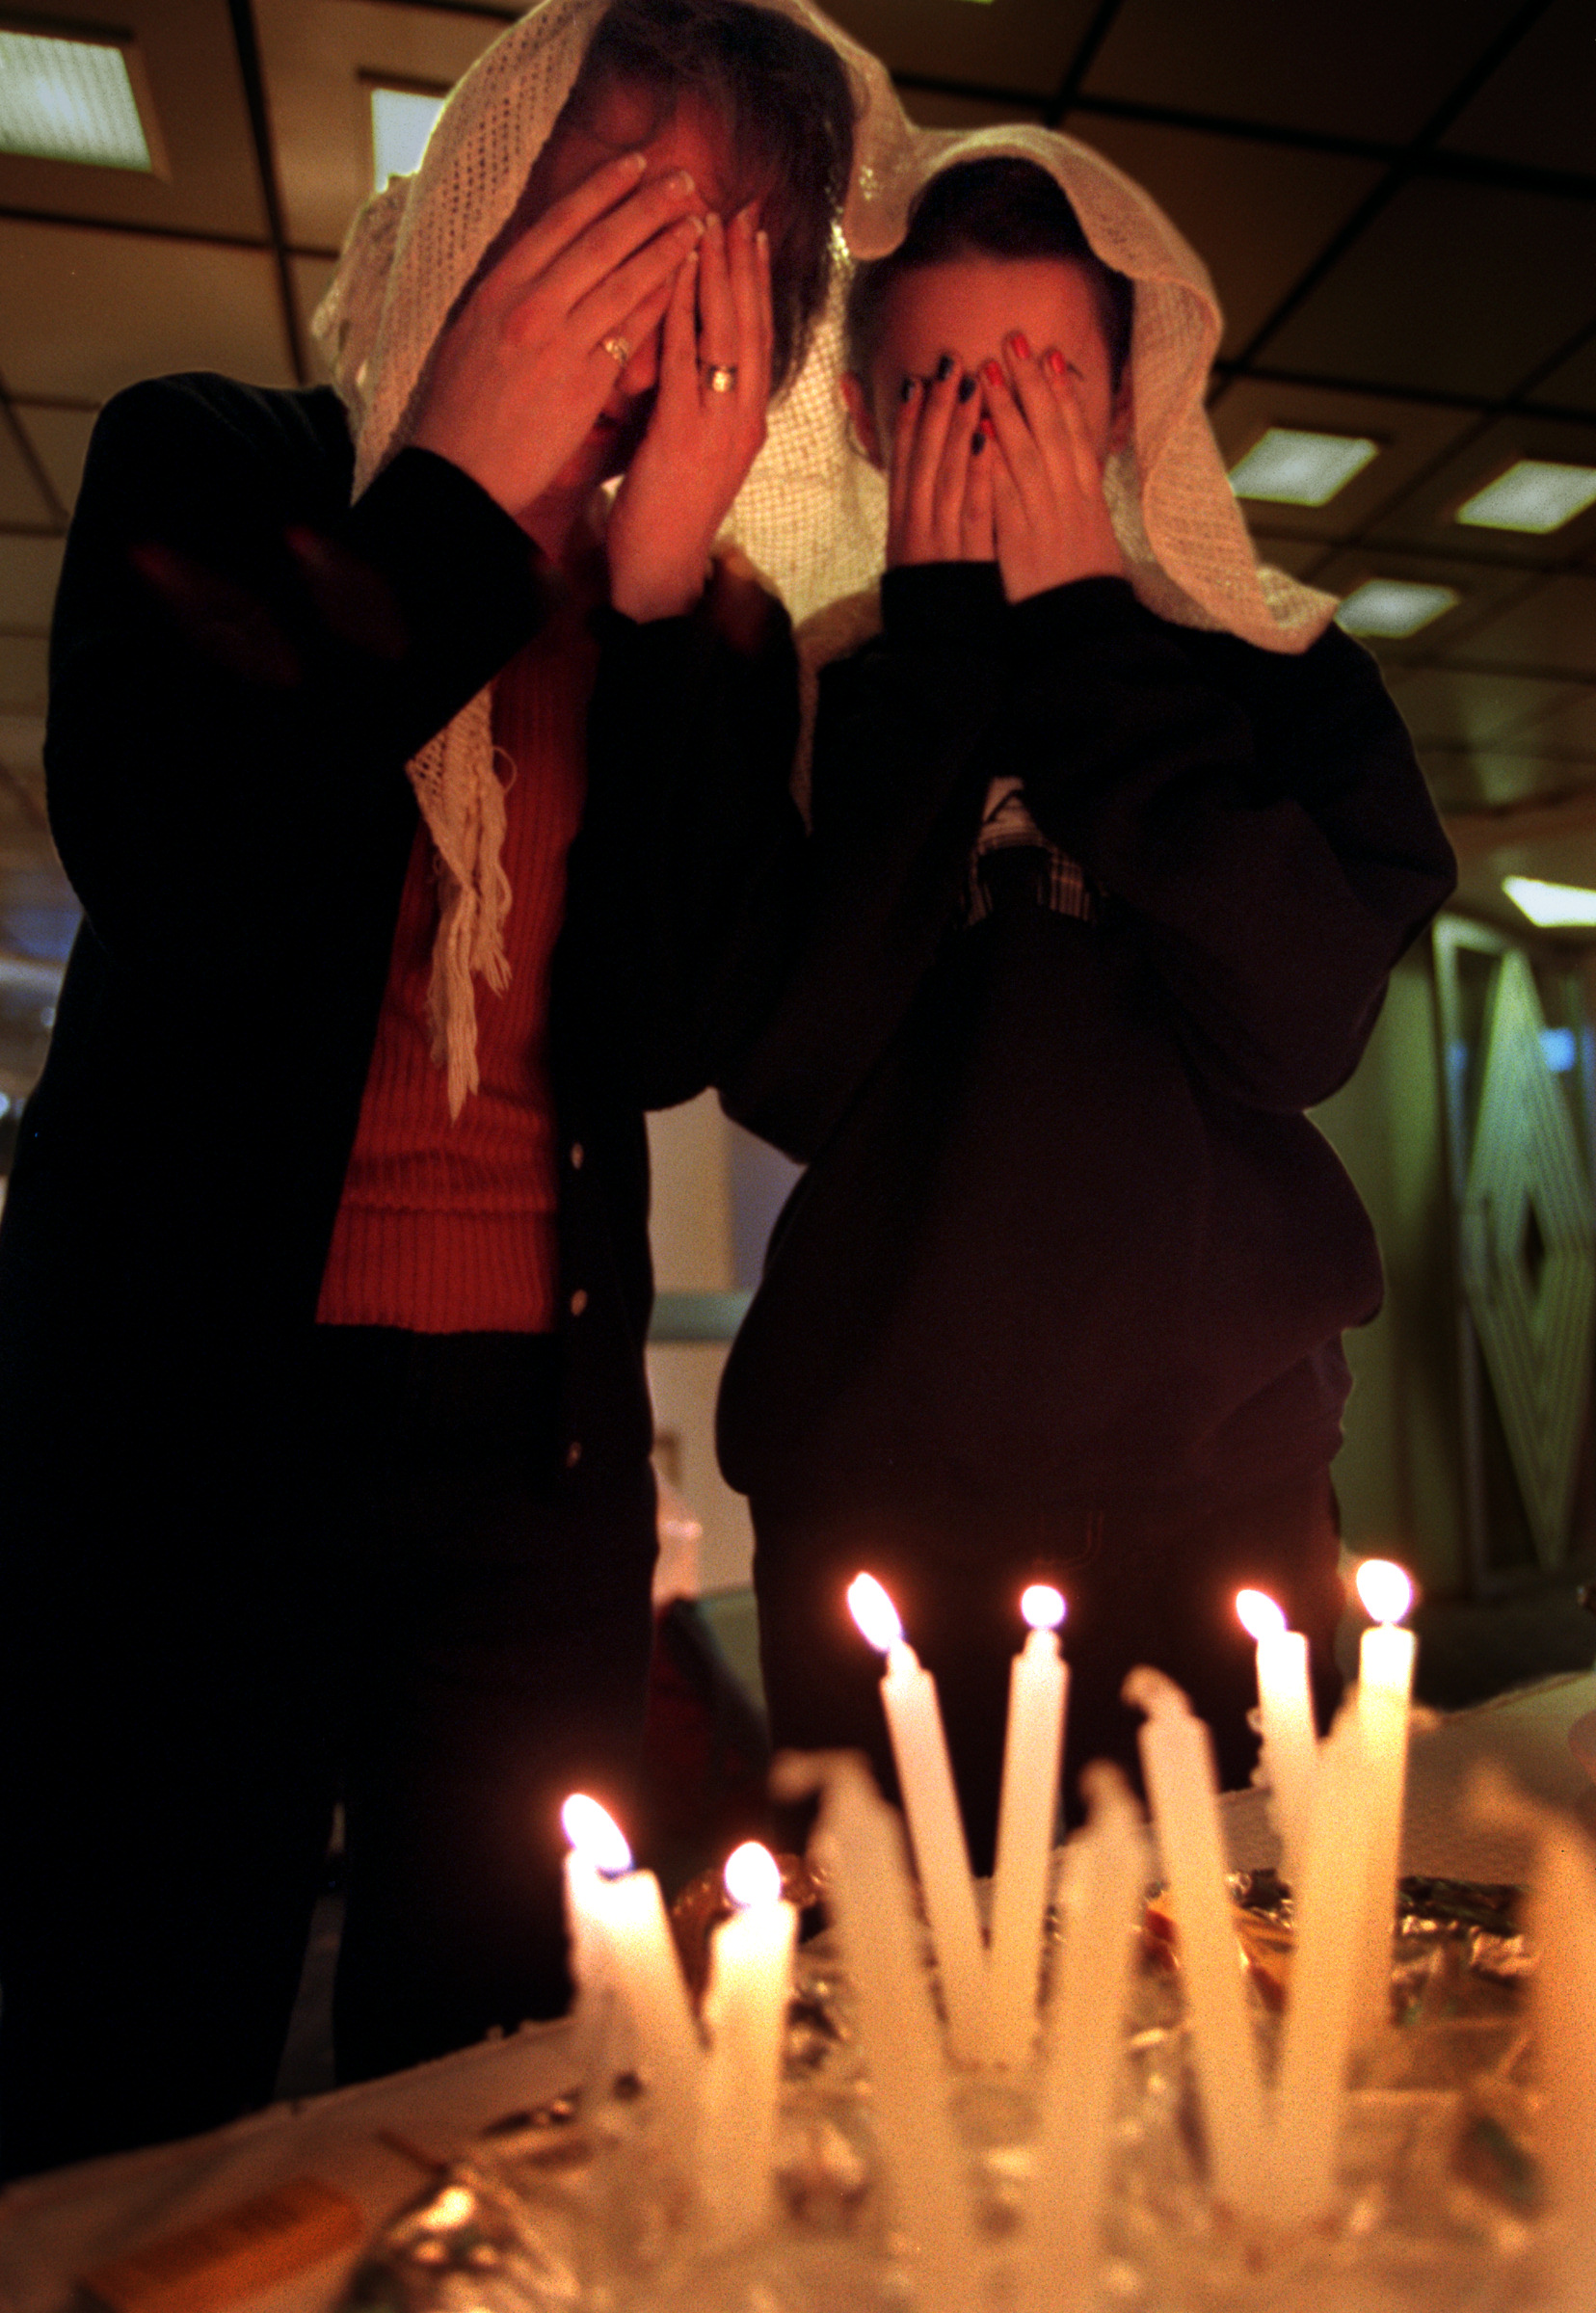  Left, Barbara King and daughter, Adeena,&nbsp; perform Shabbat ceremony in hotel at dusk Friday upon their arrival in Haifa. Shabbat is celebration of the Sabbath in Judaism.&nbsp;©Gail Fisher Los Angeles Times 